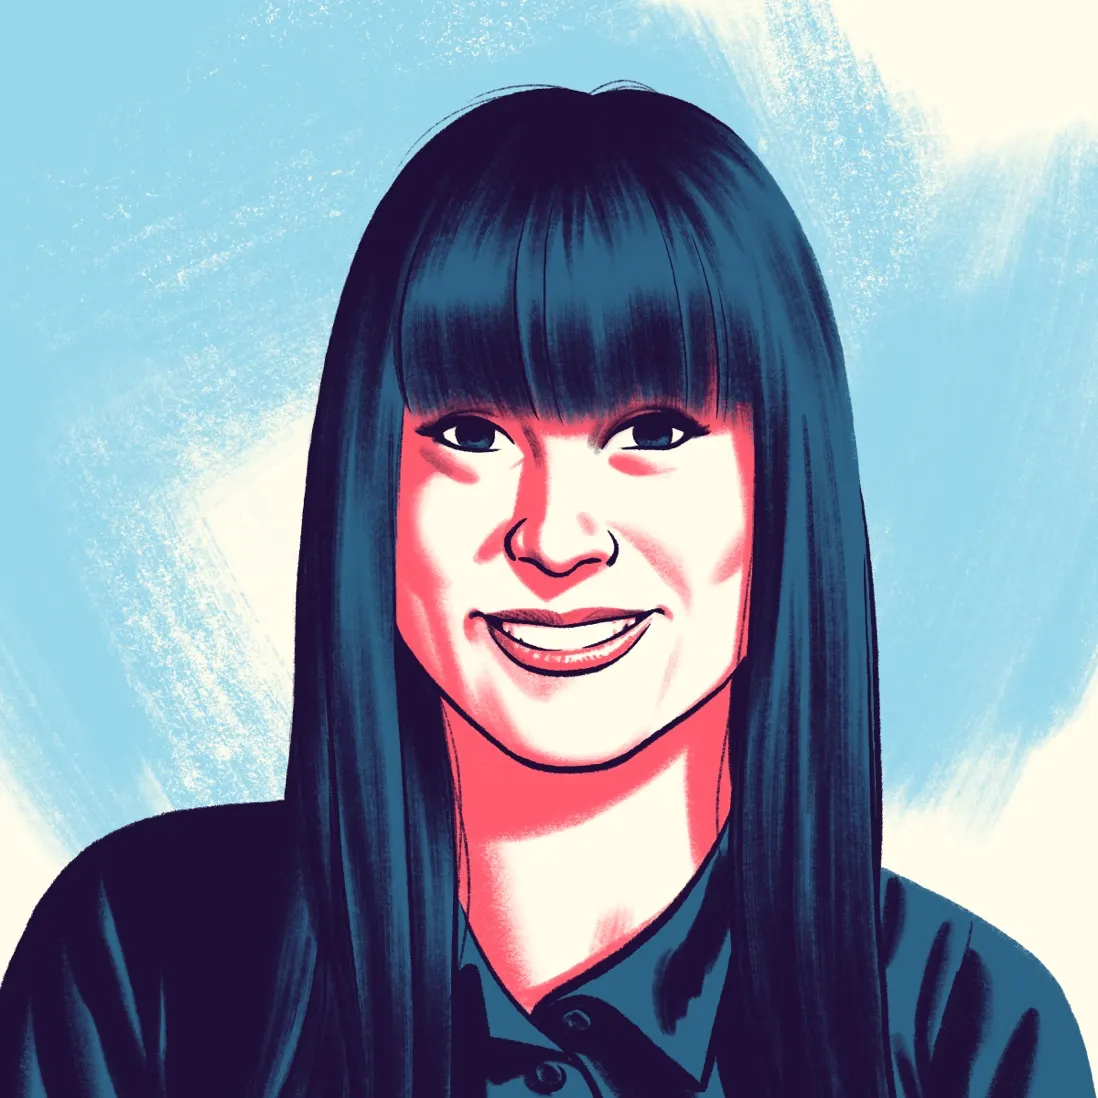 A cartoon-style illustration of a woman with long dark hair and bangs wearing a black button-down shirt.